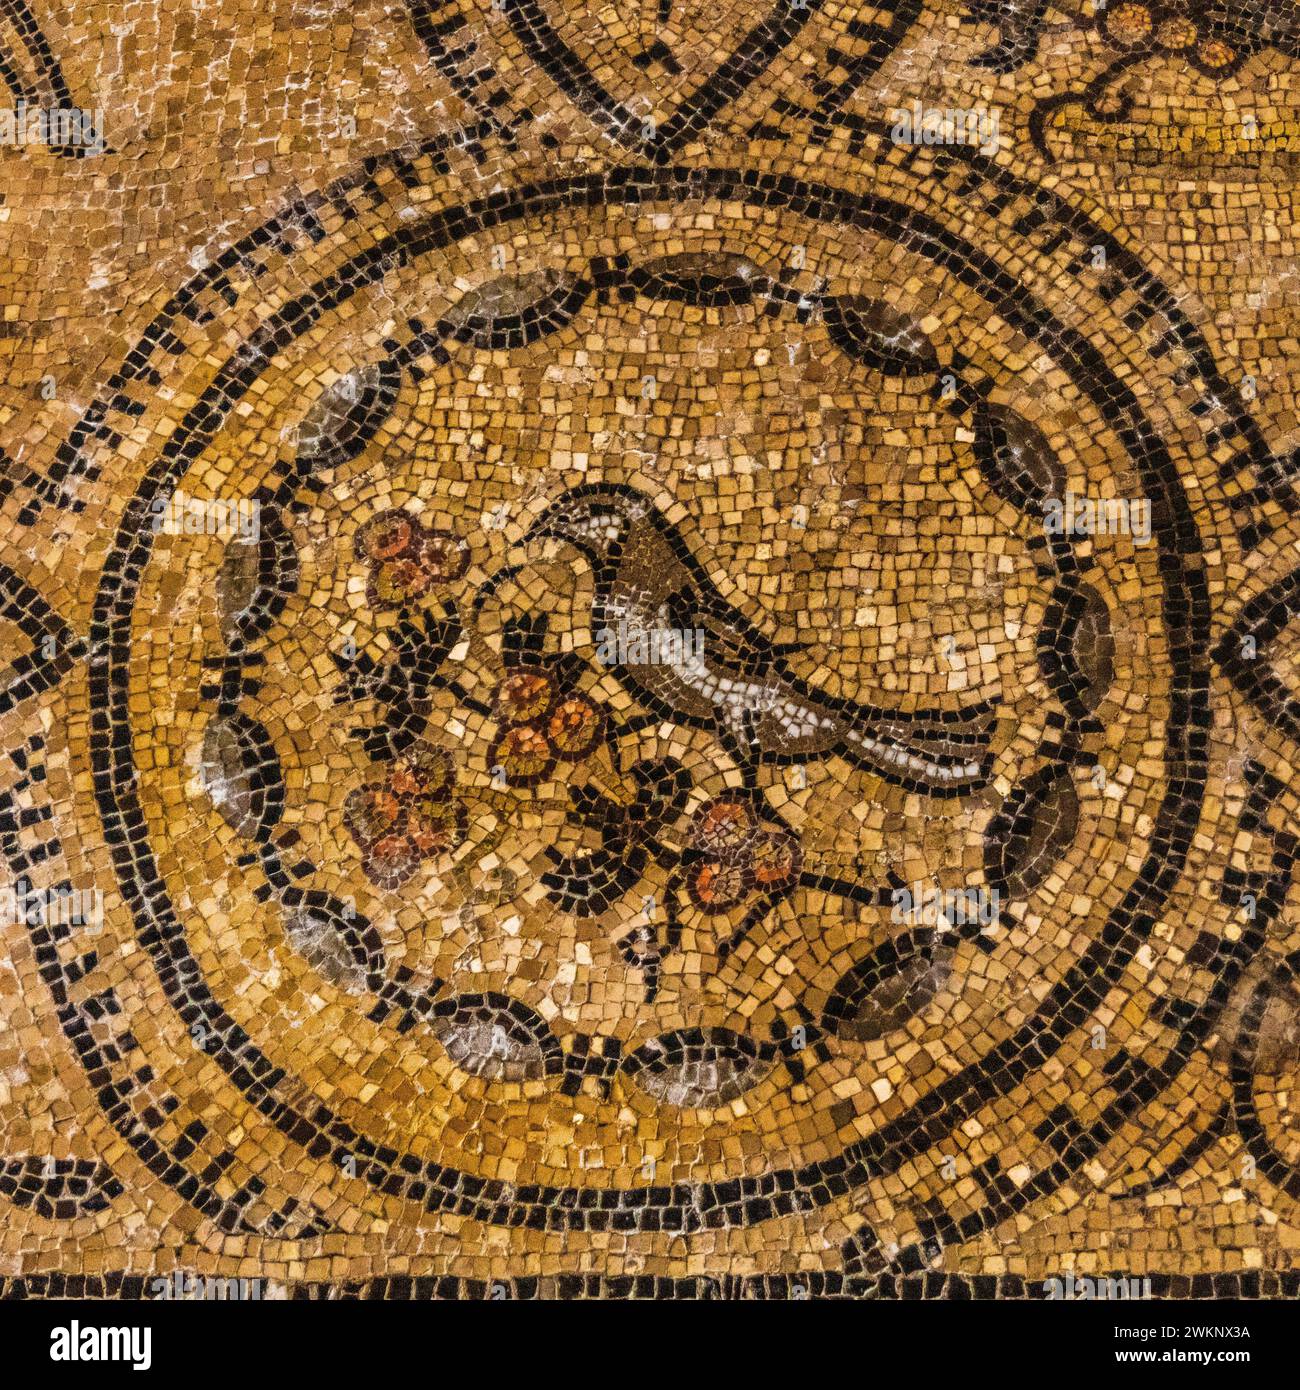 Basilica of Aquileia from the 11th century, largest floor mosaic of the Western Roman Empire, UNESCO World Heritage Site, important city in the Roman Stock Photo